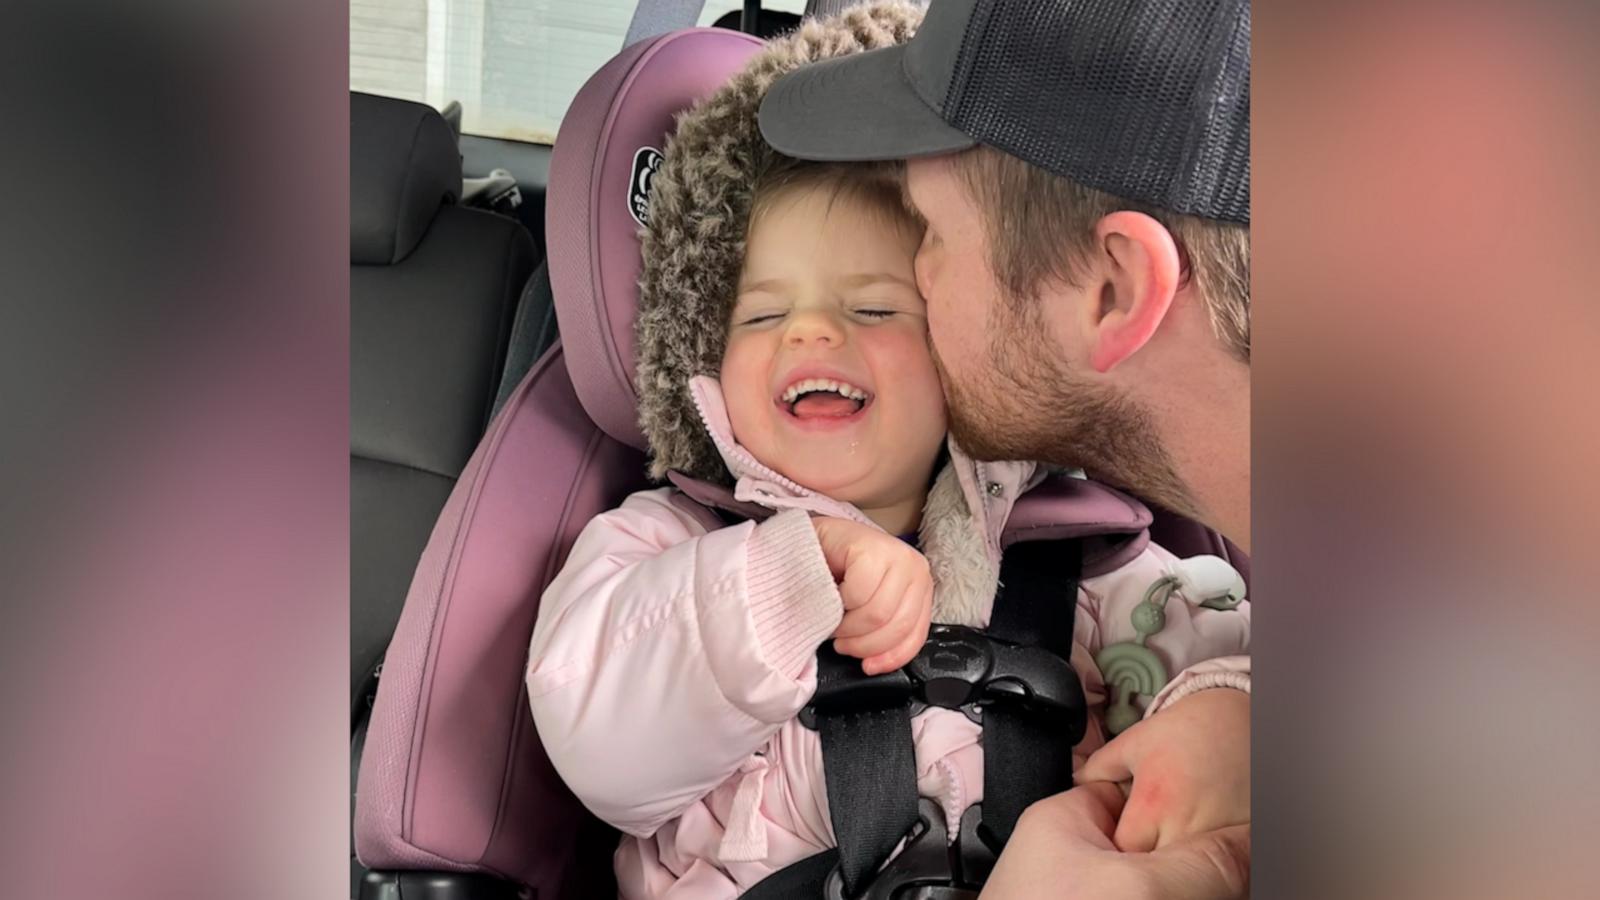 VIDEO: Little girl has sweetest reaction to hearing dad’s voice